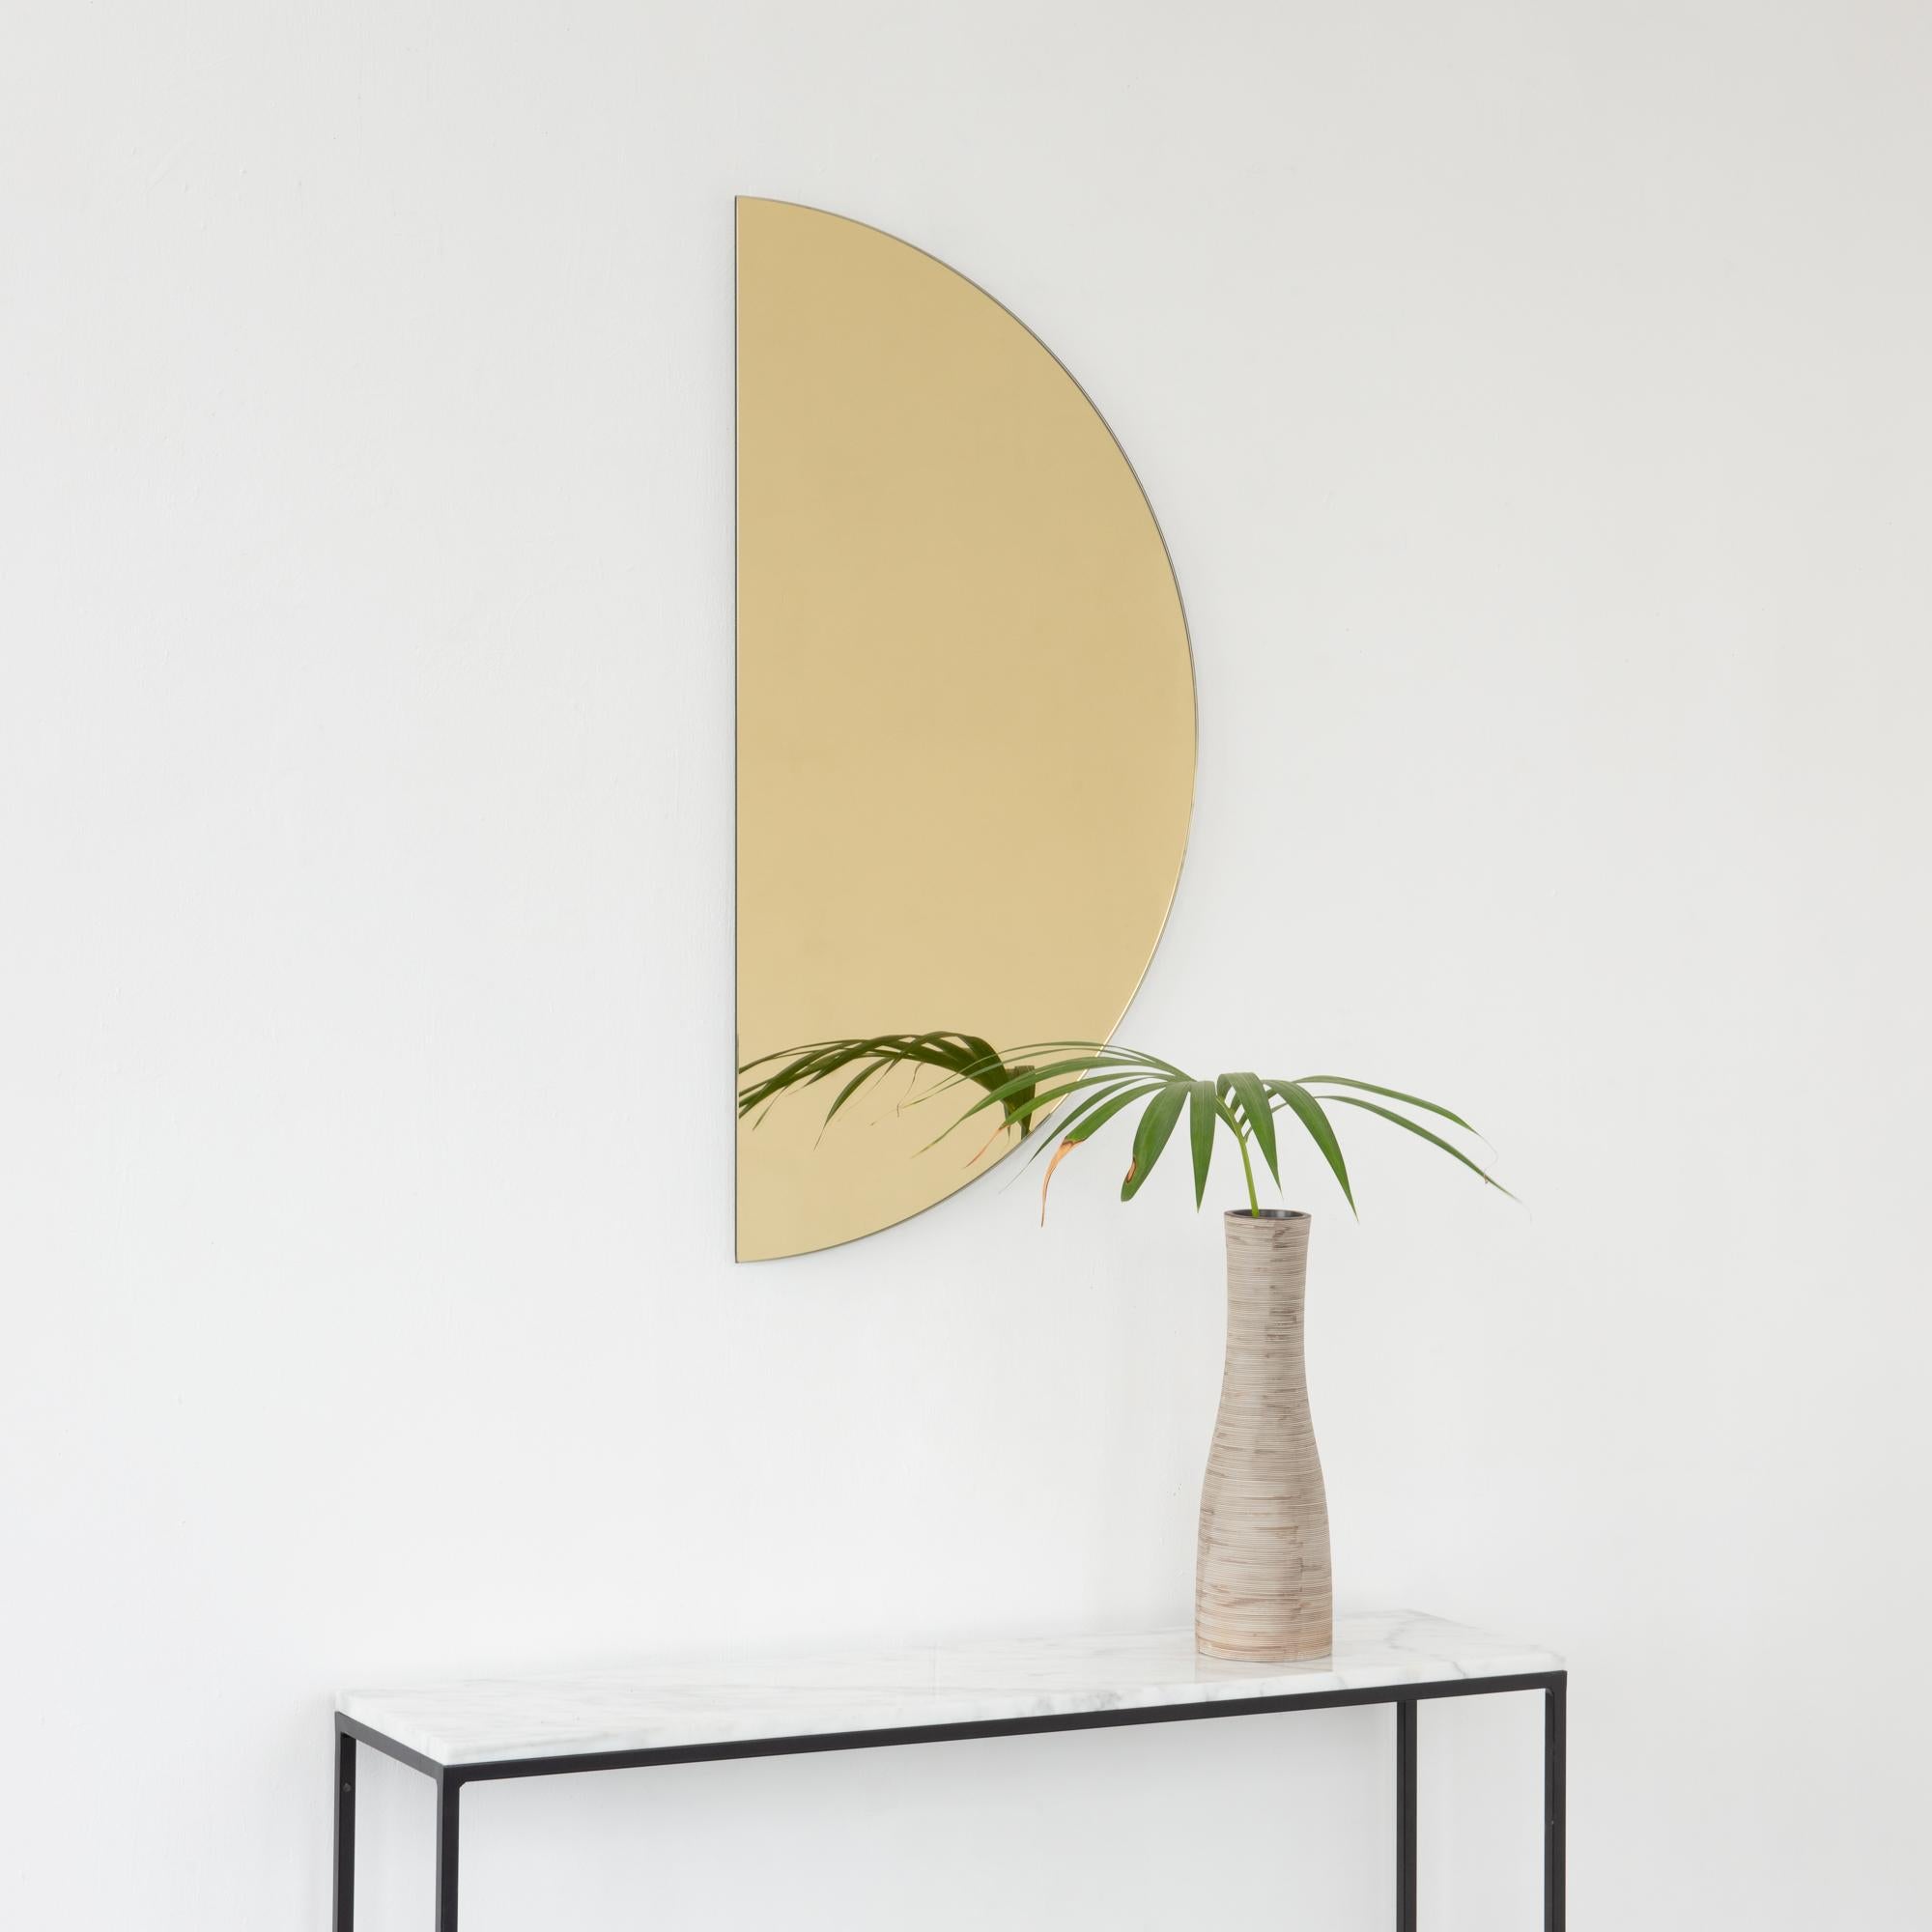 Minimalist half-moon Luna™ gold tinted frameless mirror with a floating effect. Fitted with a quality and ingenious hanging system for a flexible installation in 4 different directions. Designed and made in London, UK. 

Our mirrors are designed